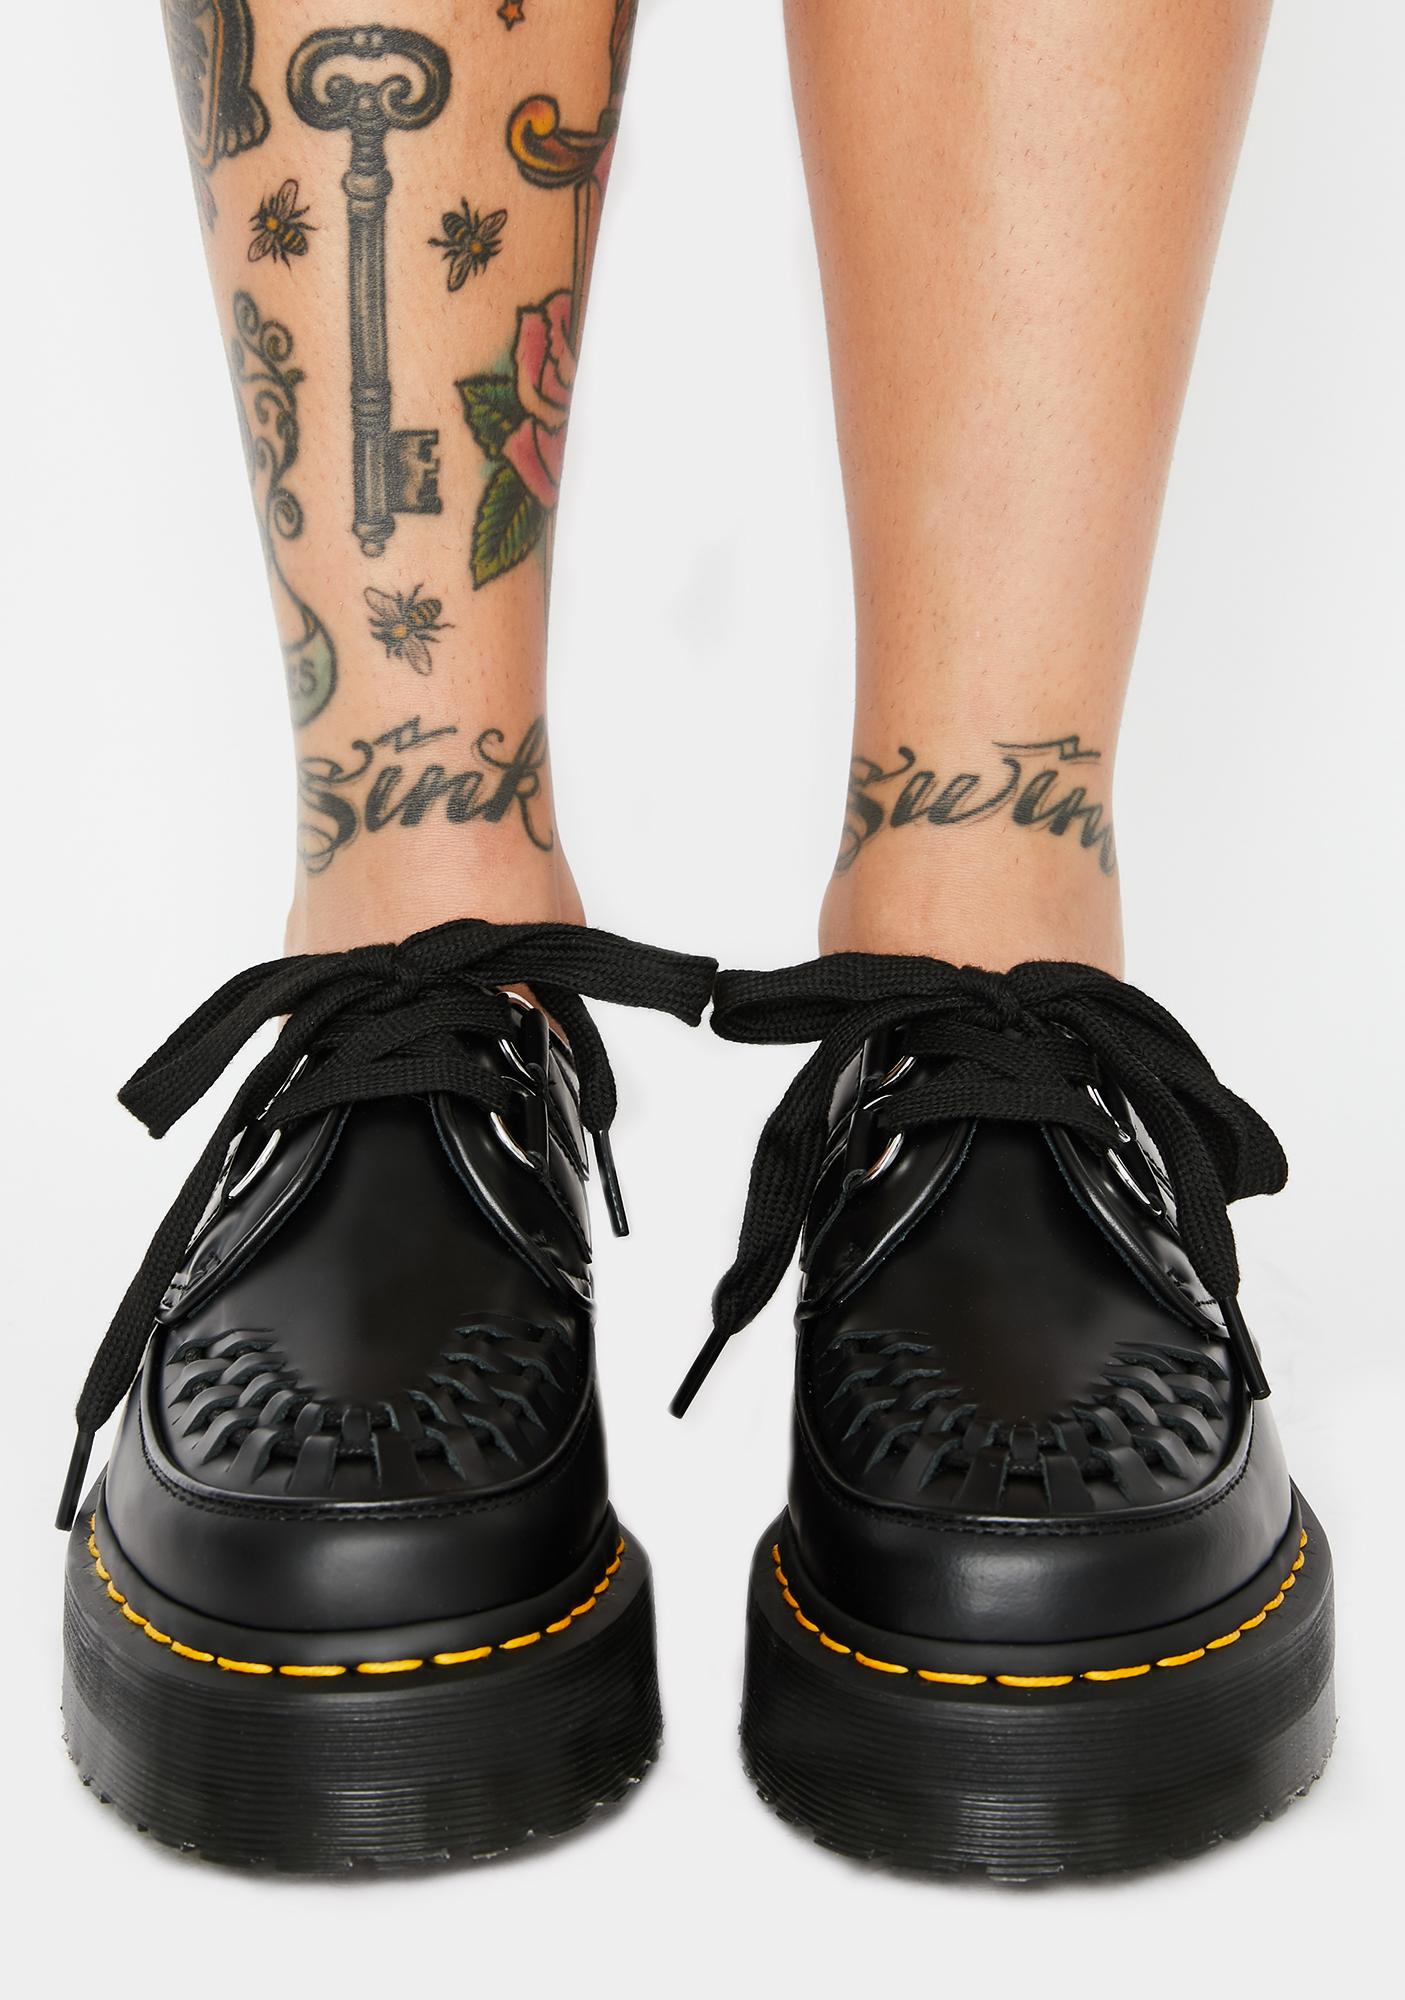 Dr Martens Sidney Creeper Top Sellers, 57% OFF | empow-her.com